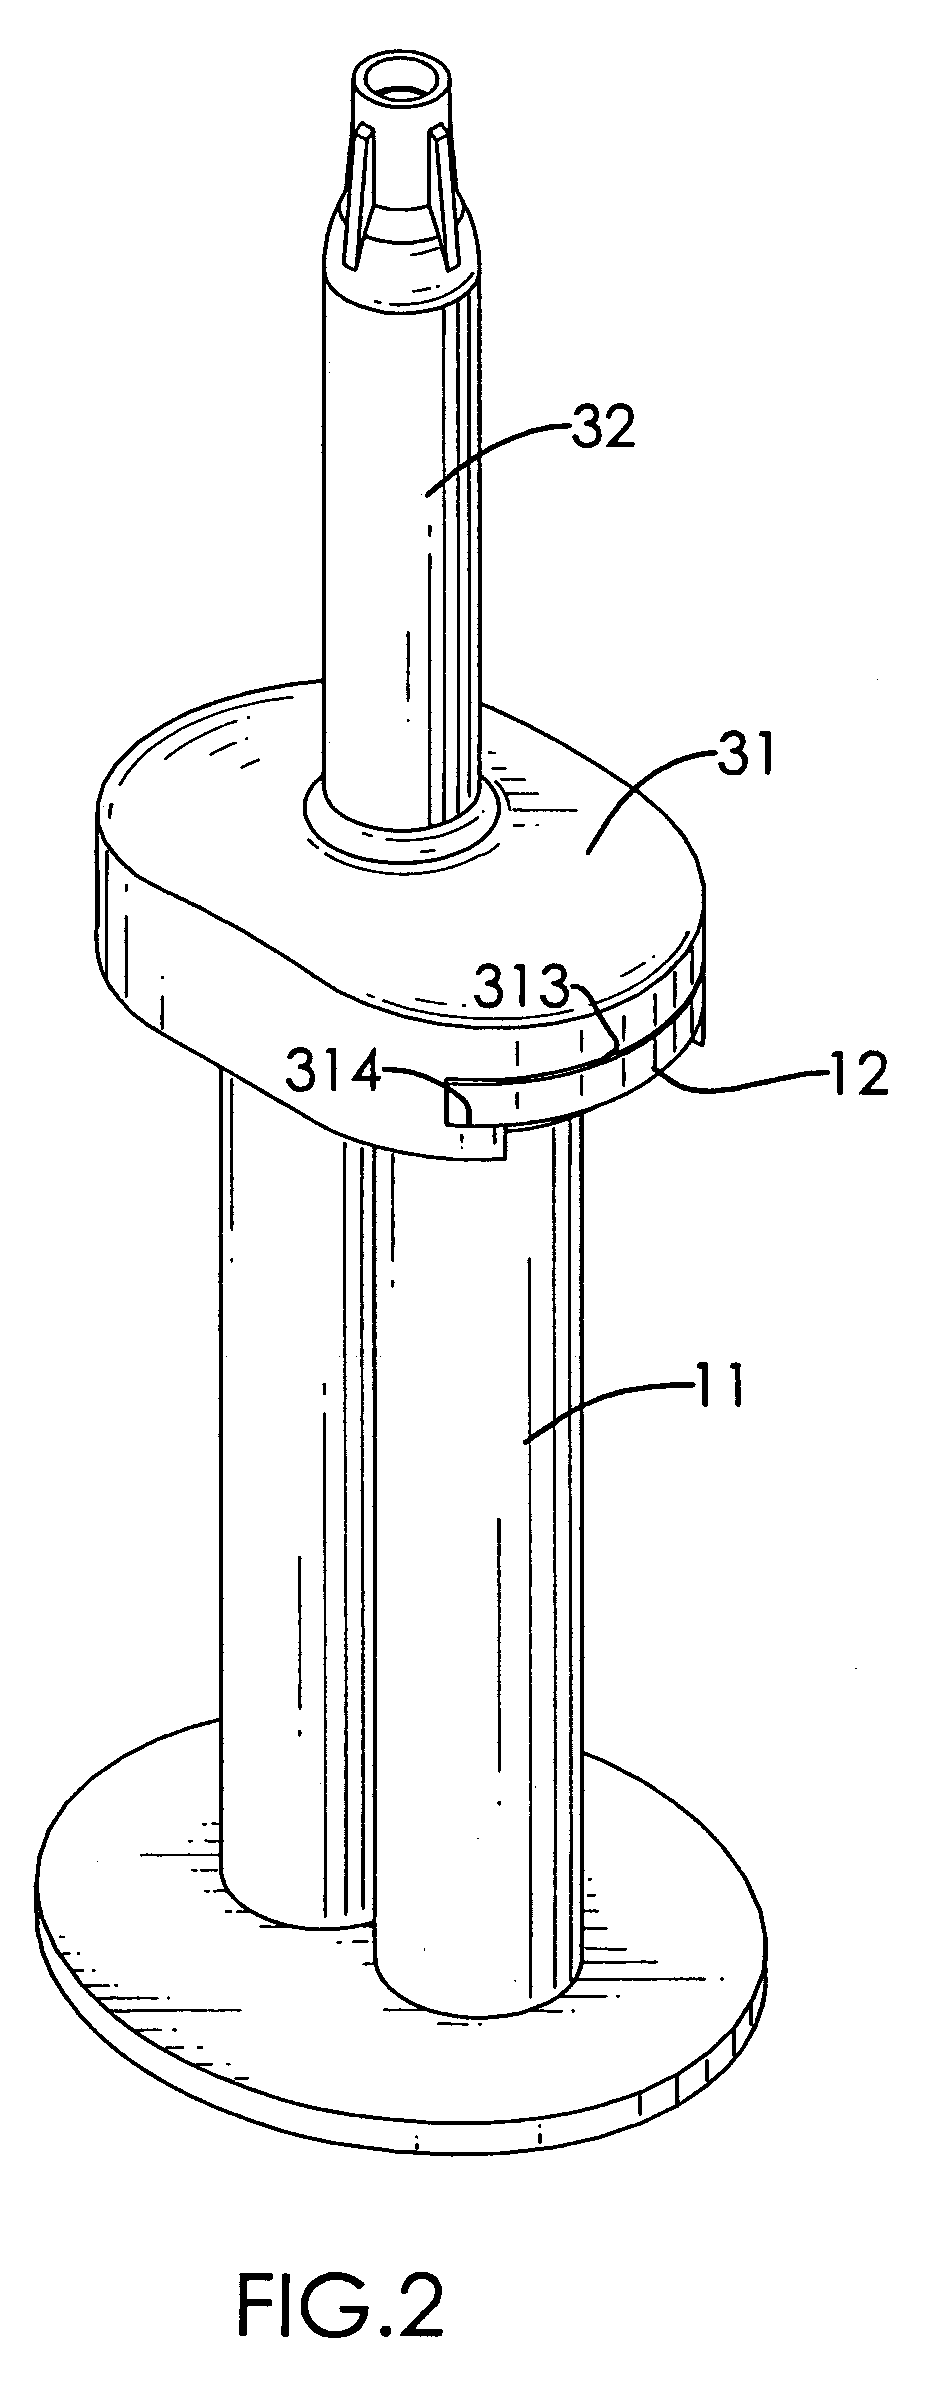 Slidable securing device for a mixer to allow communication between a mixer housing and a mixer inlet portion of the mixer